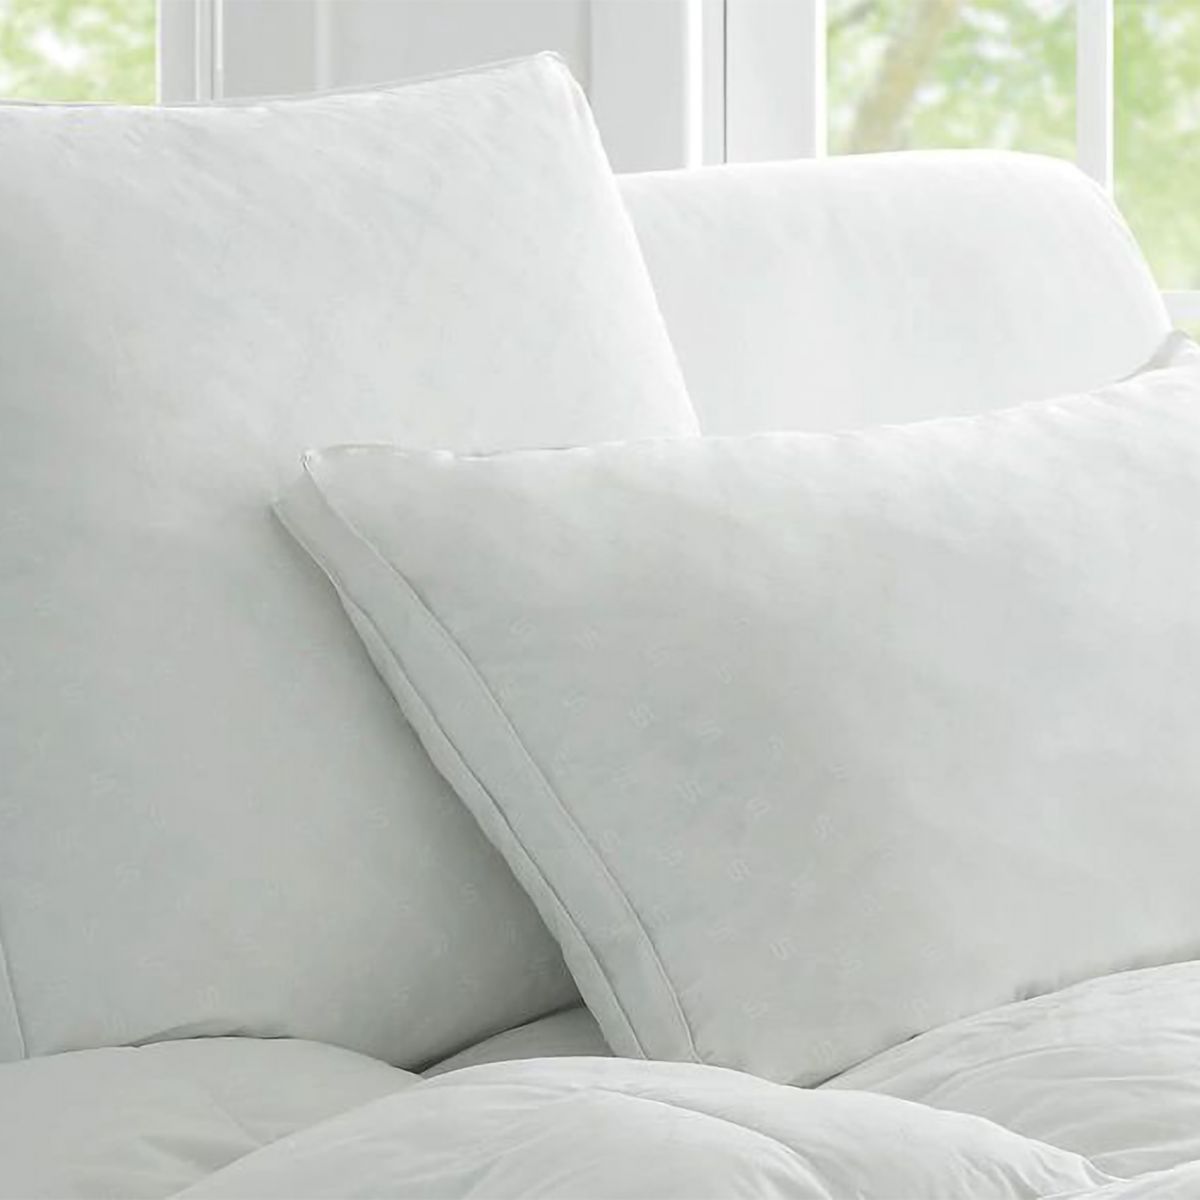 Deluxe Dream pillow by Sheridan 